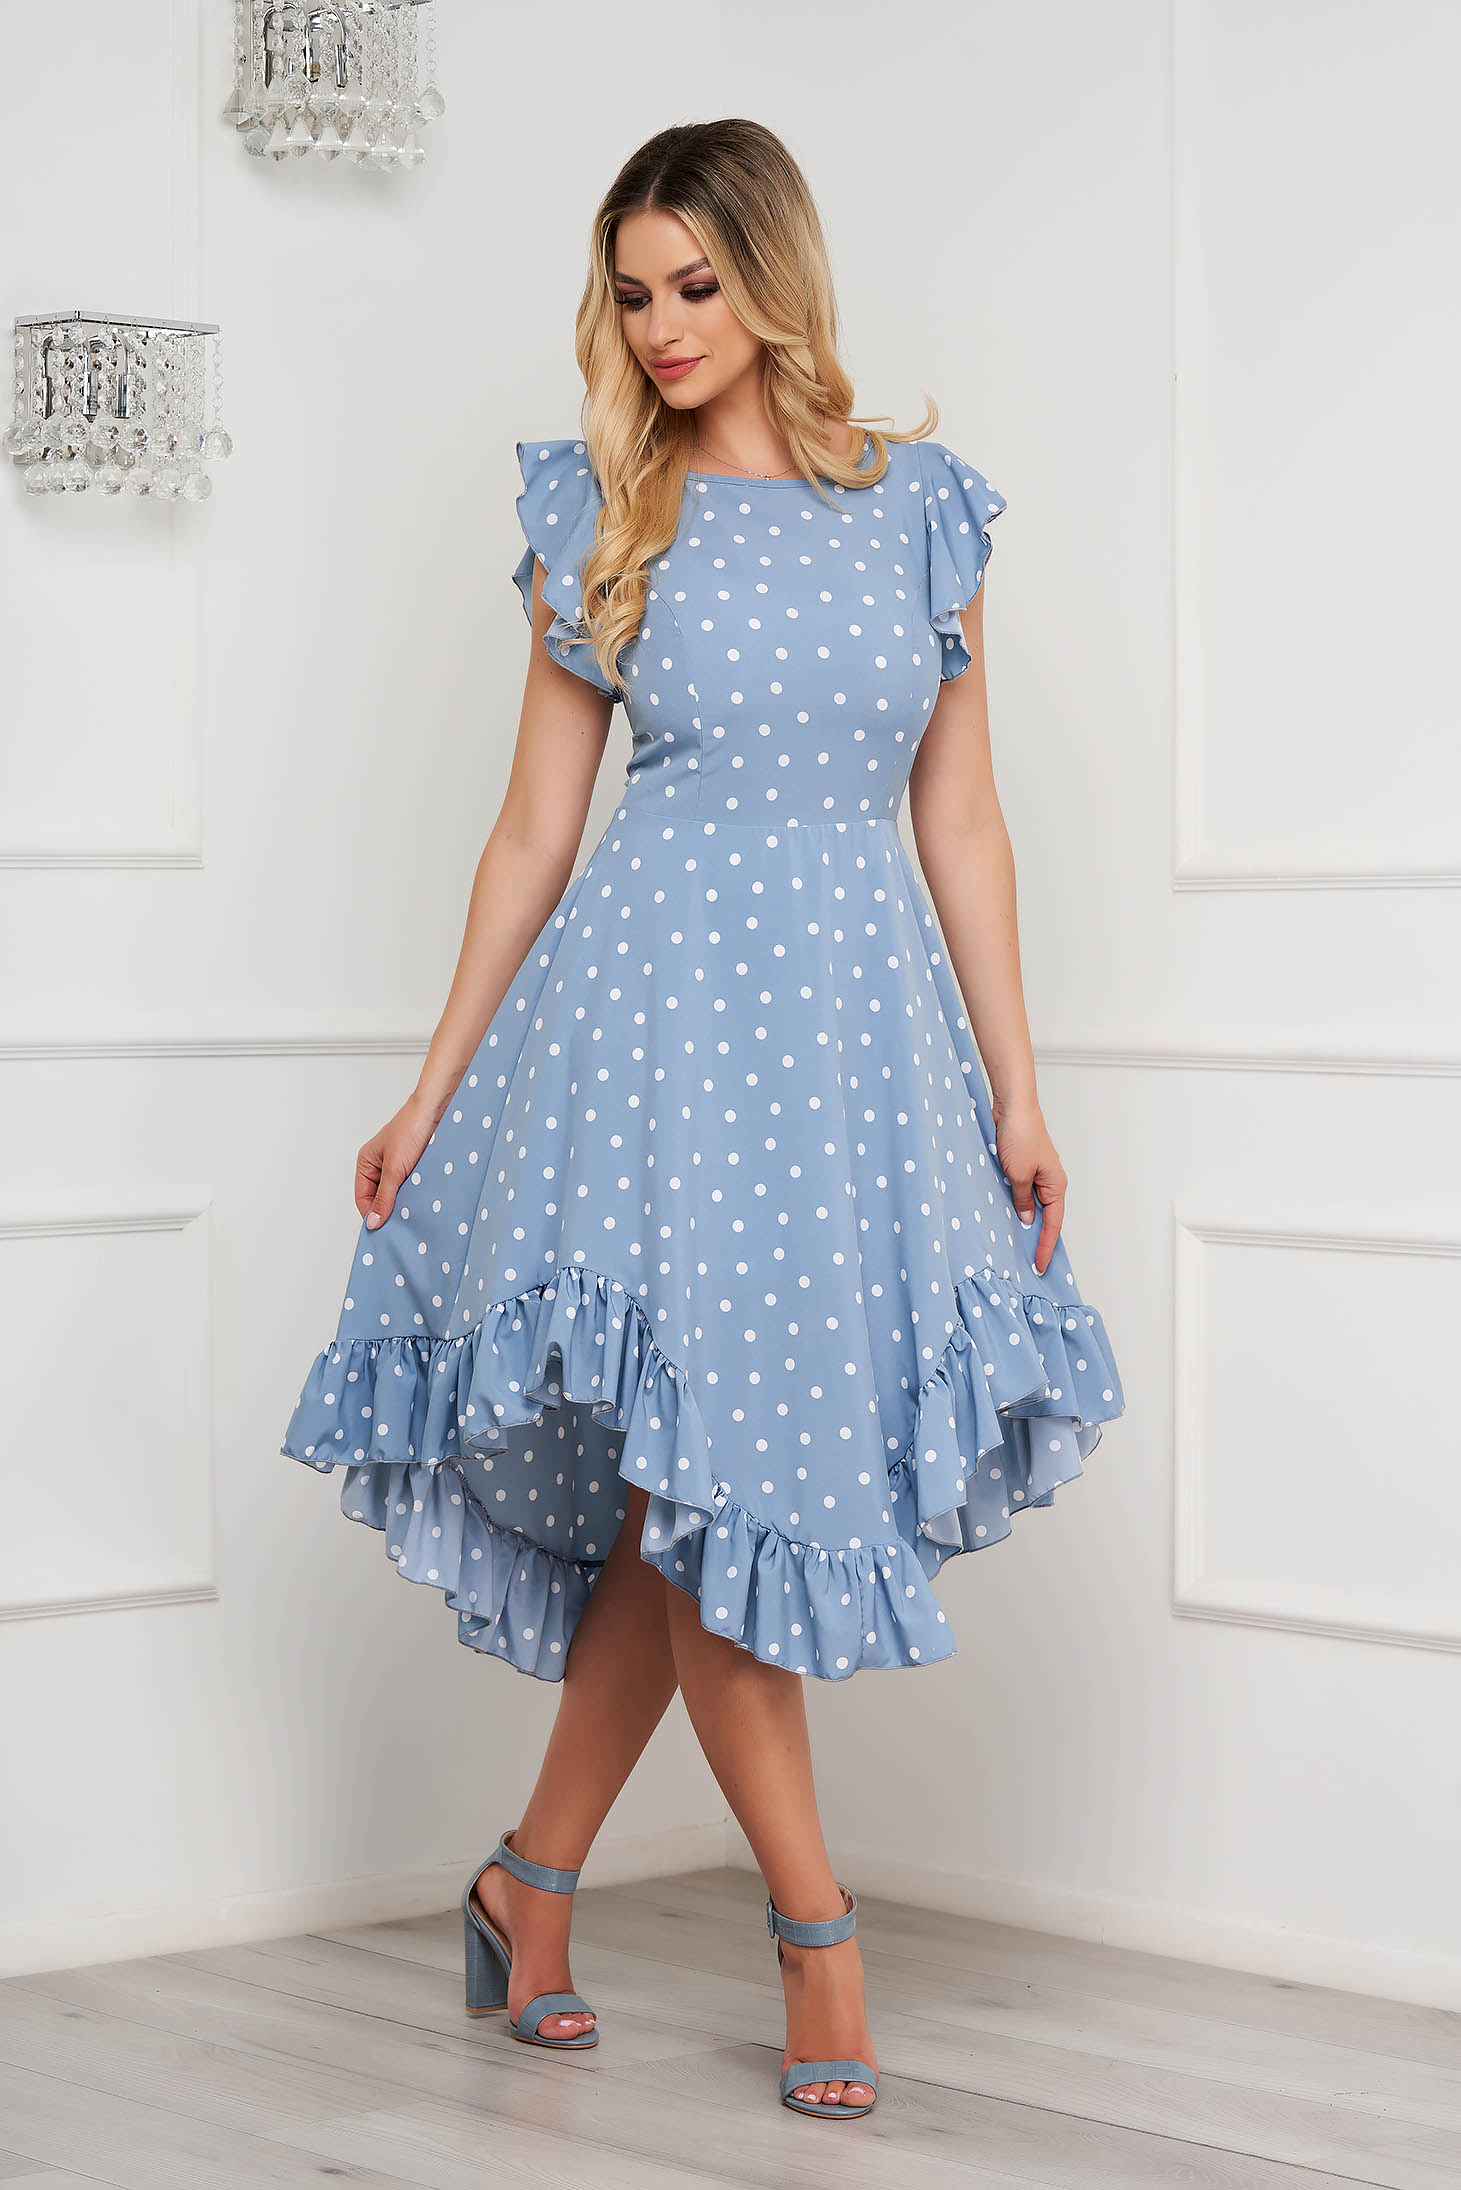 - StarShinerS dress midi cloche with ruffle details asymmetrical georgette